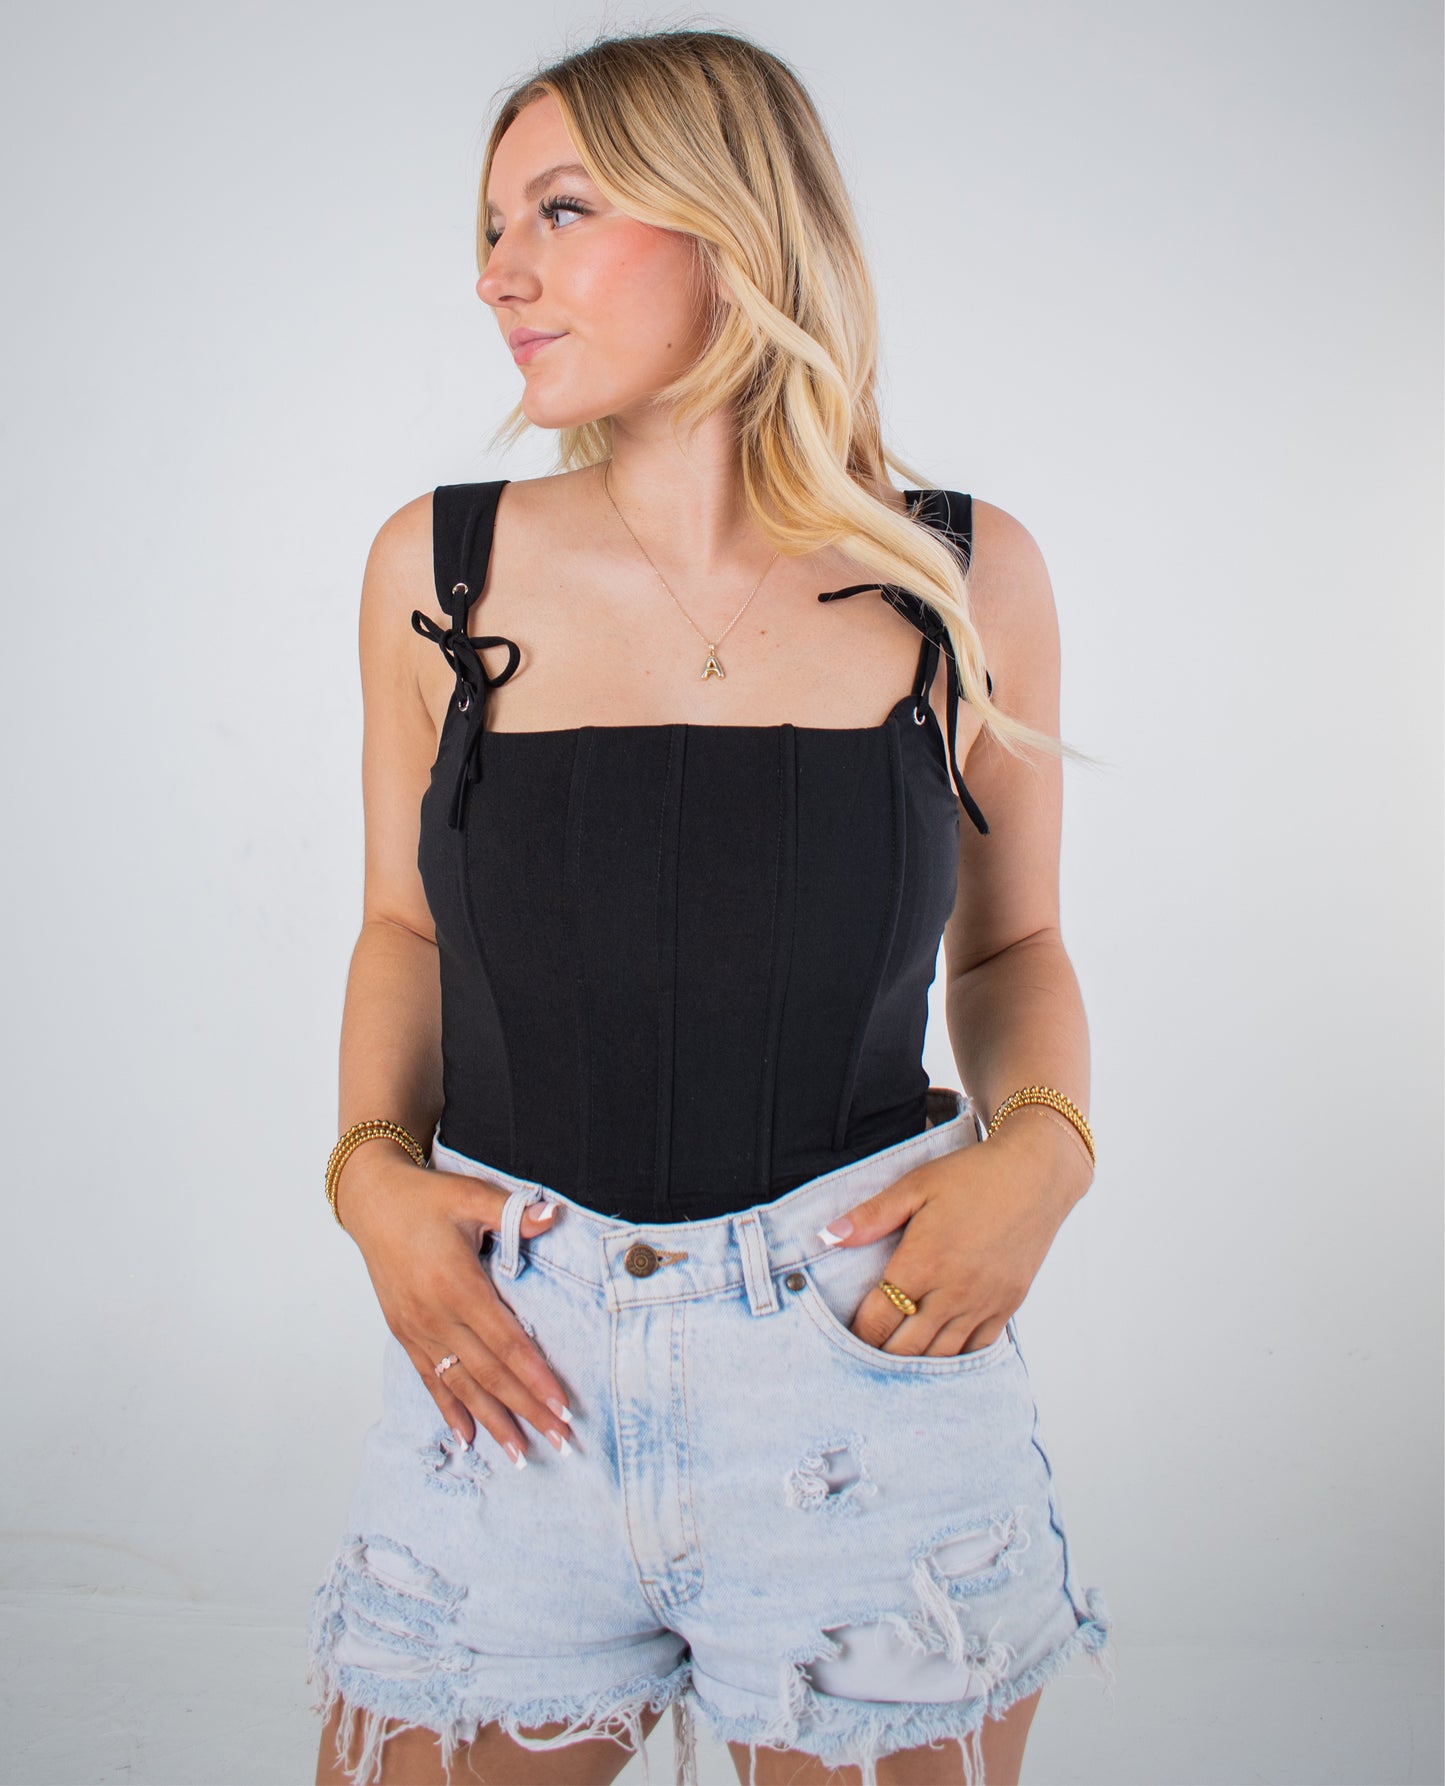 Girls Night Out Black Corset Top